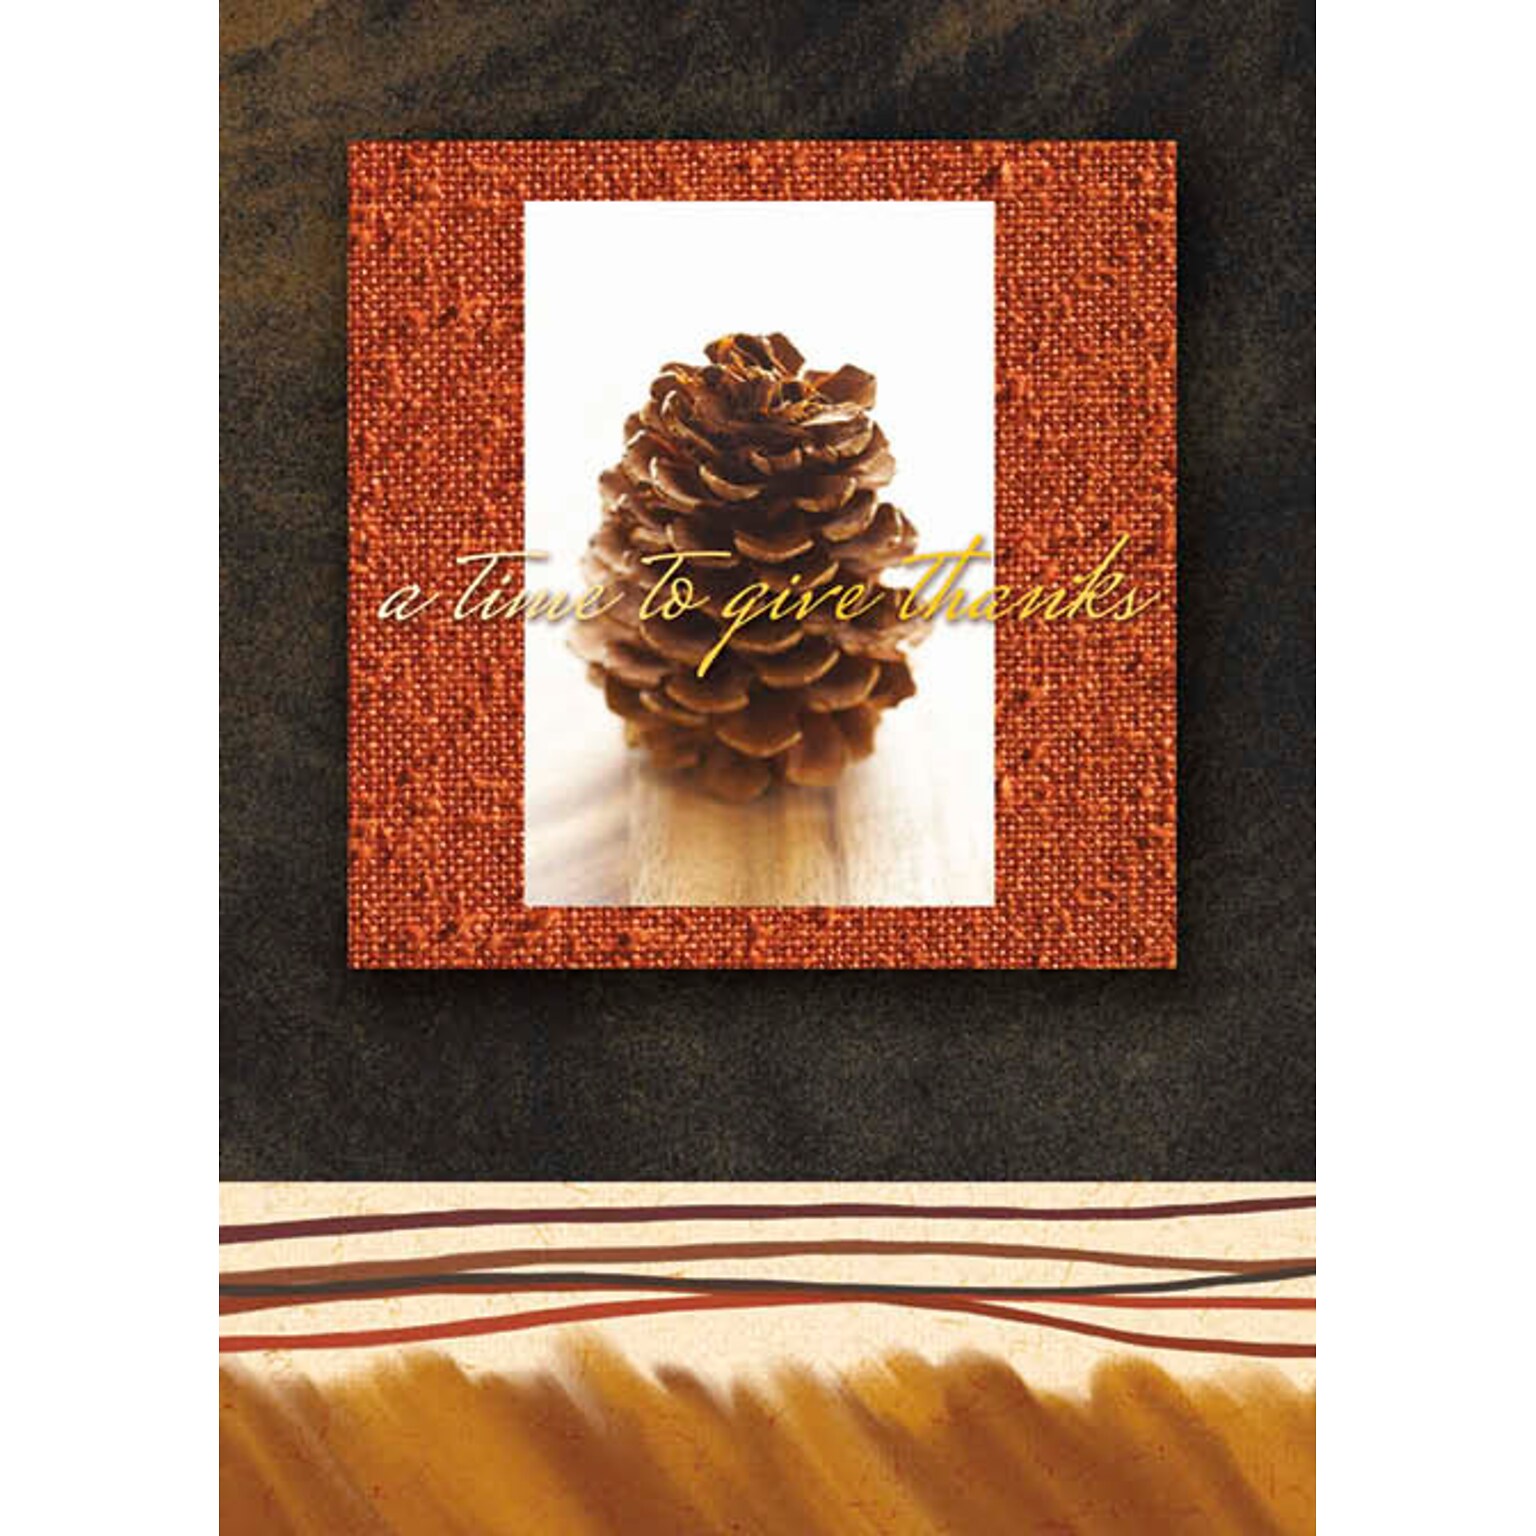 A Time To Give Thanks Pinecone Seasonal Greeting Cards, With A7 Envelopes, 7 x 5, 25 Cards per Set